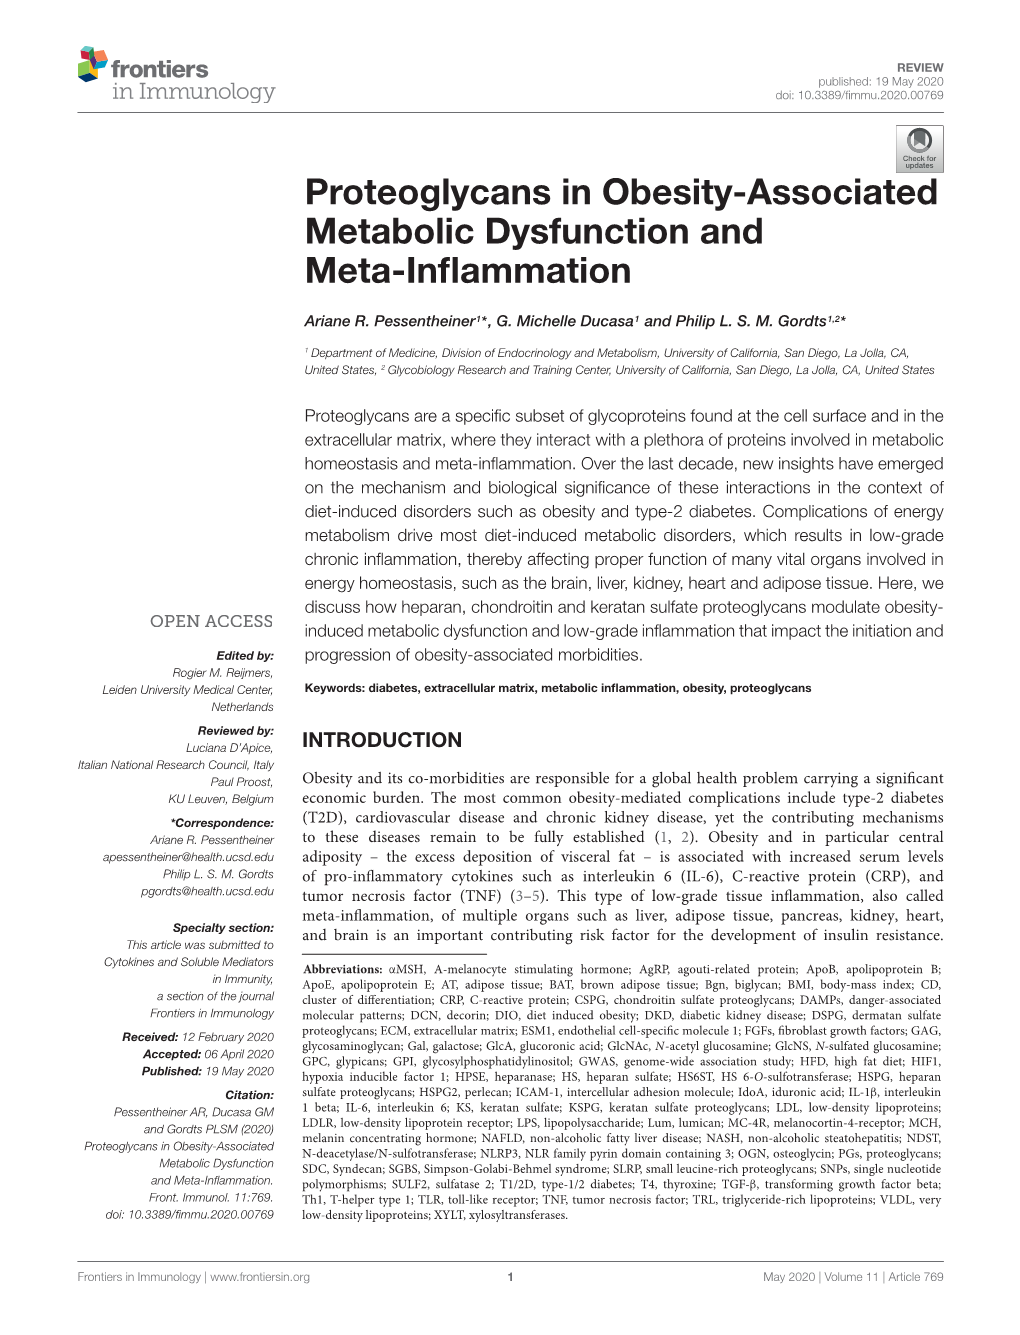 Obesity-Associated Metabolic Dysfunction and Meta-Inflammation